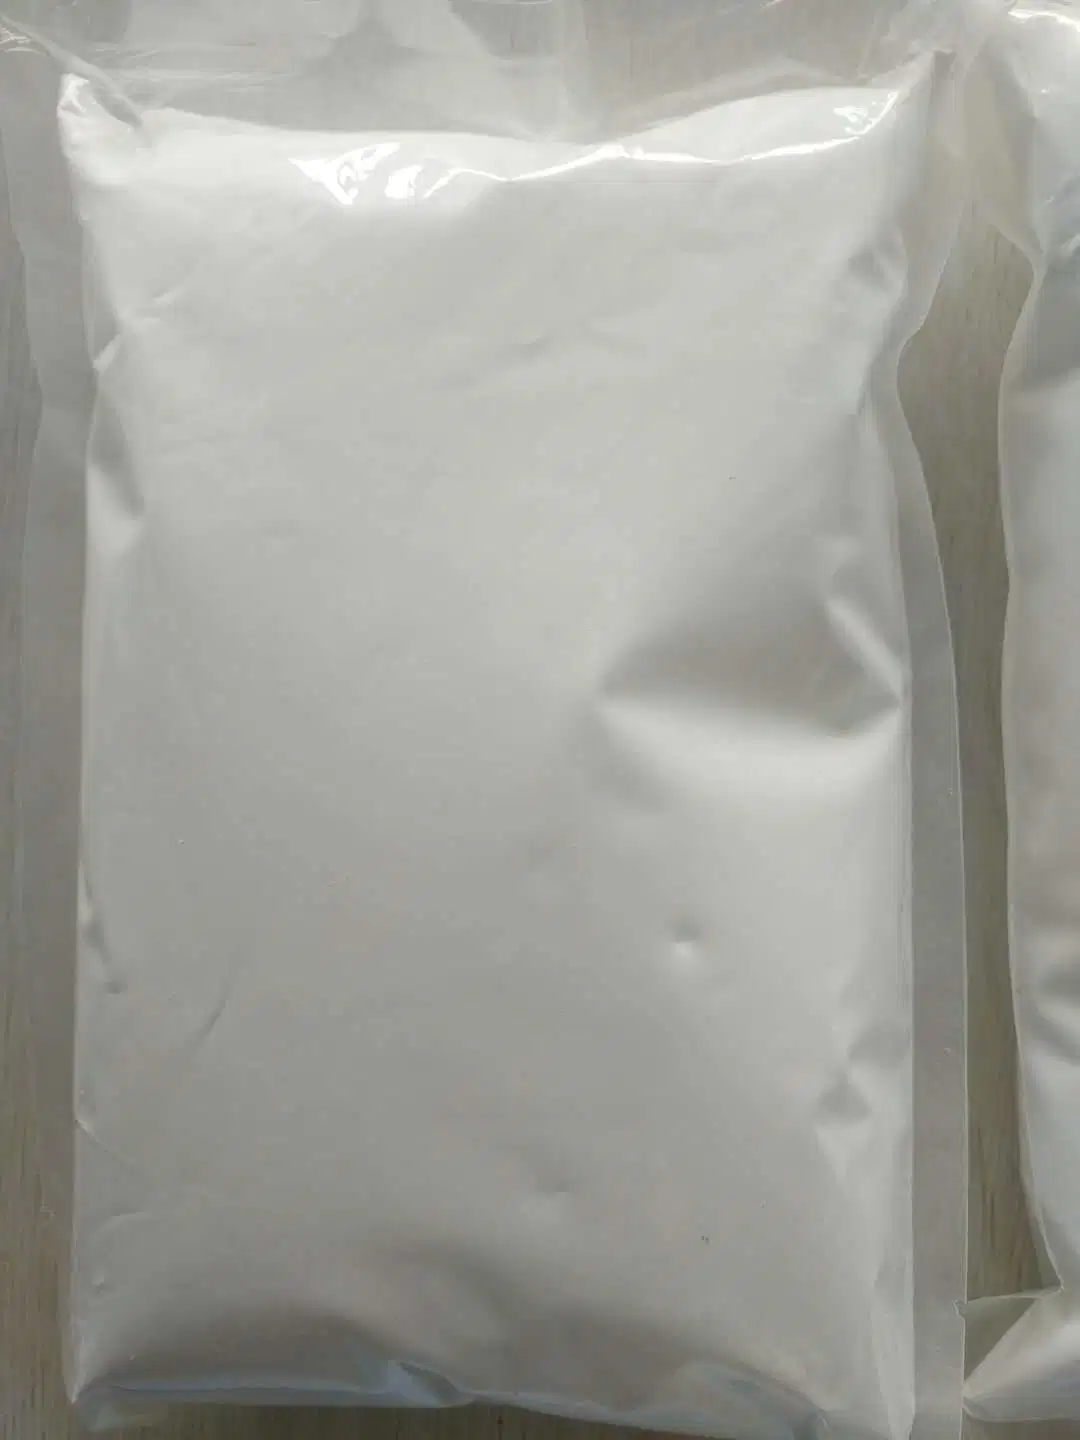 Magnesium Sulfate Mgso4 Magnesium Sulphate Anhydrous CAS No 7487-88-9